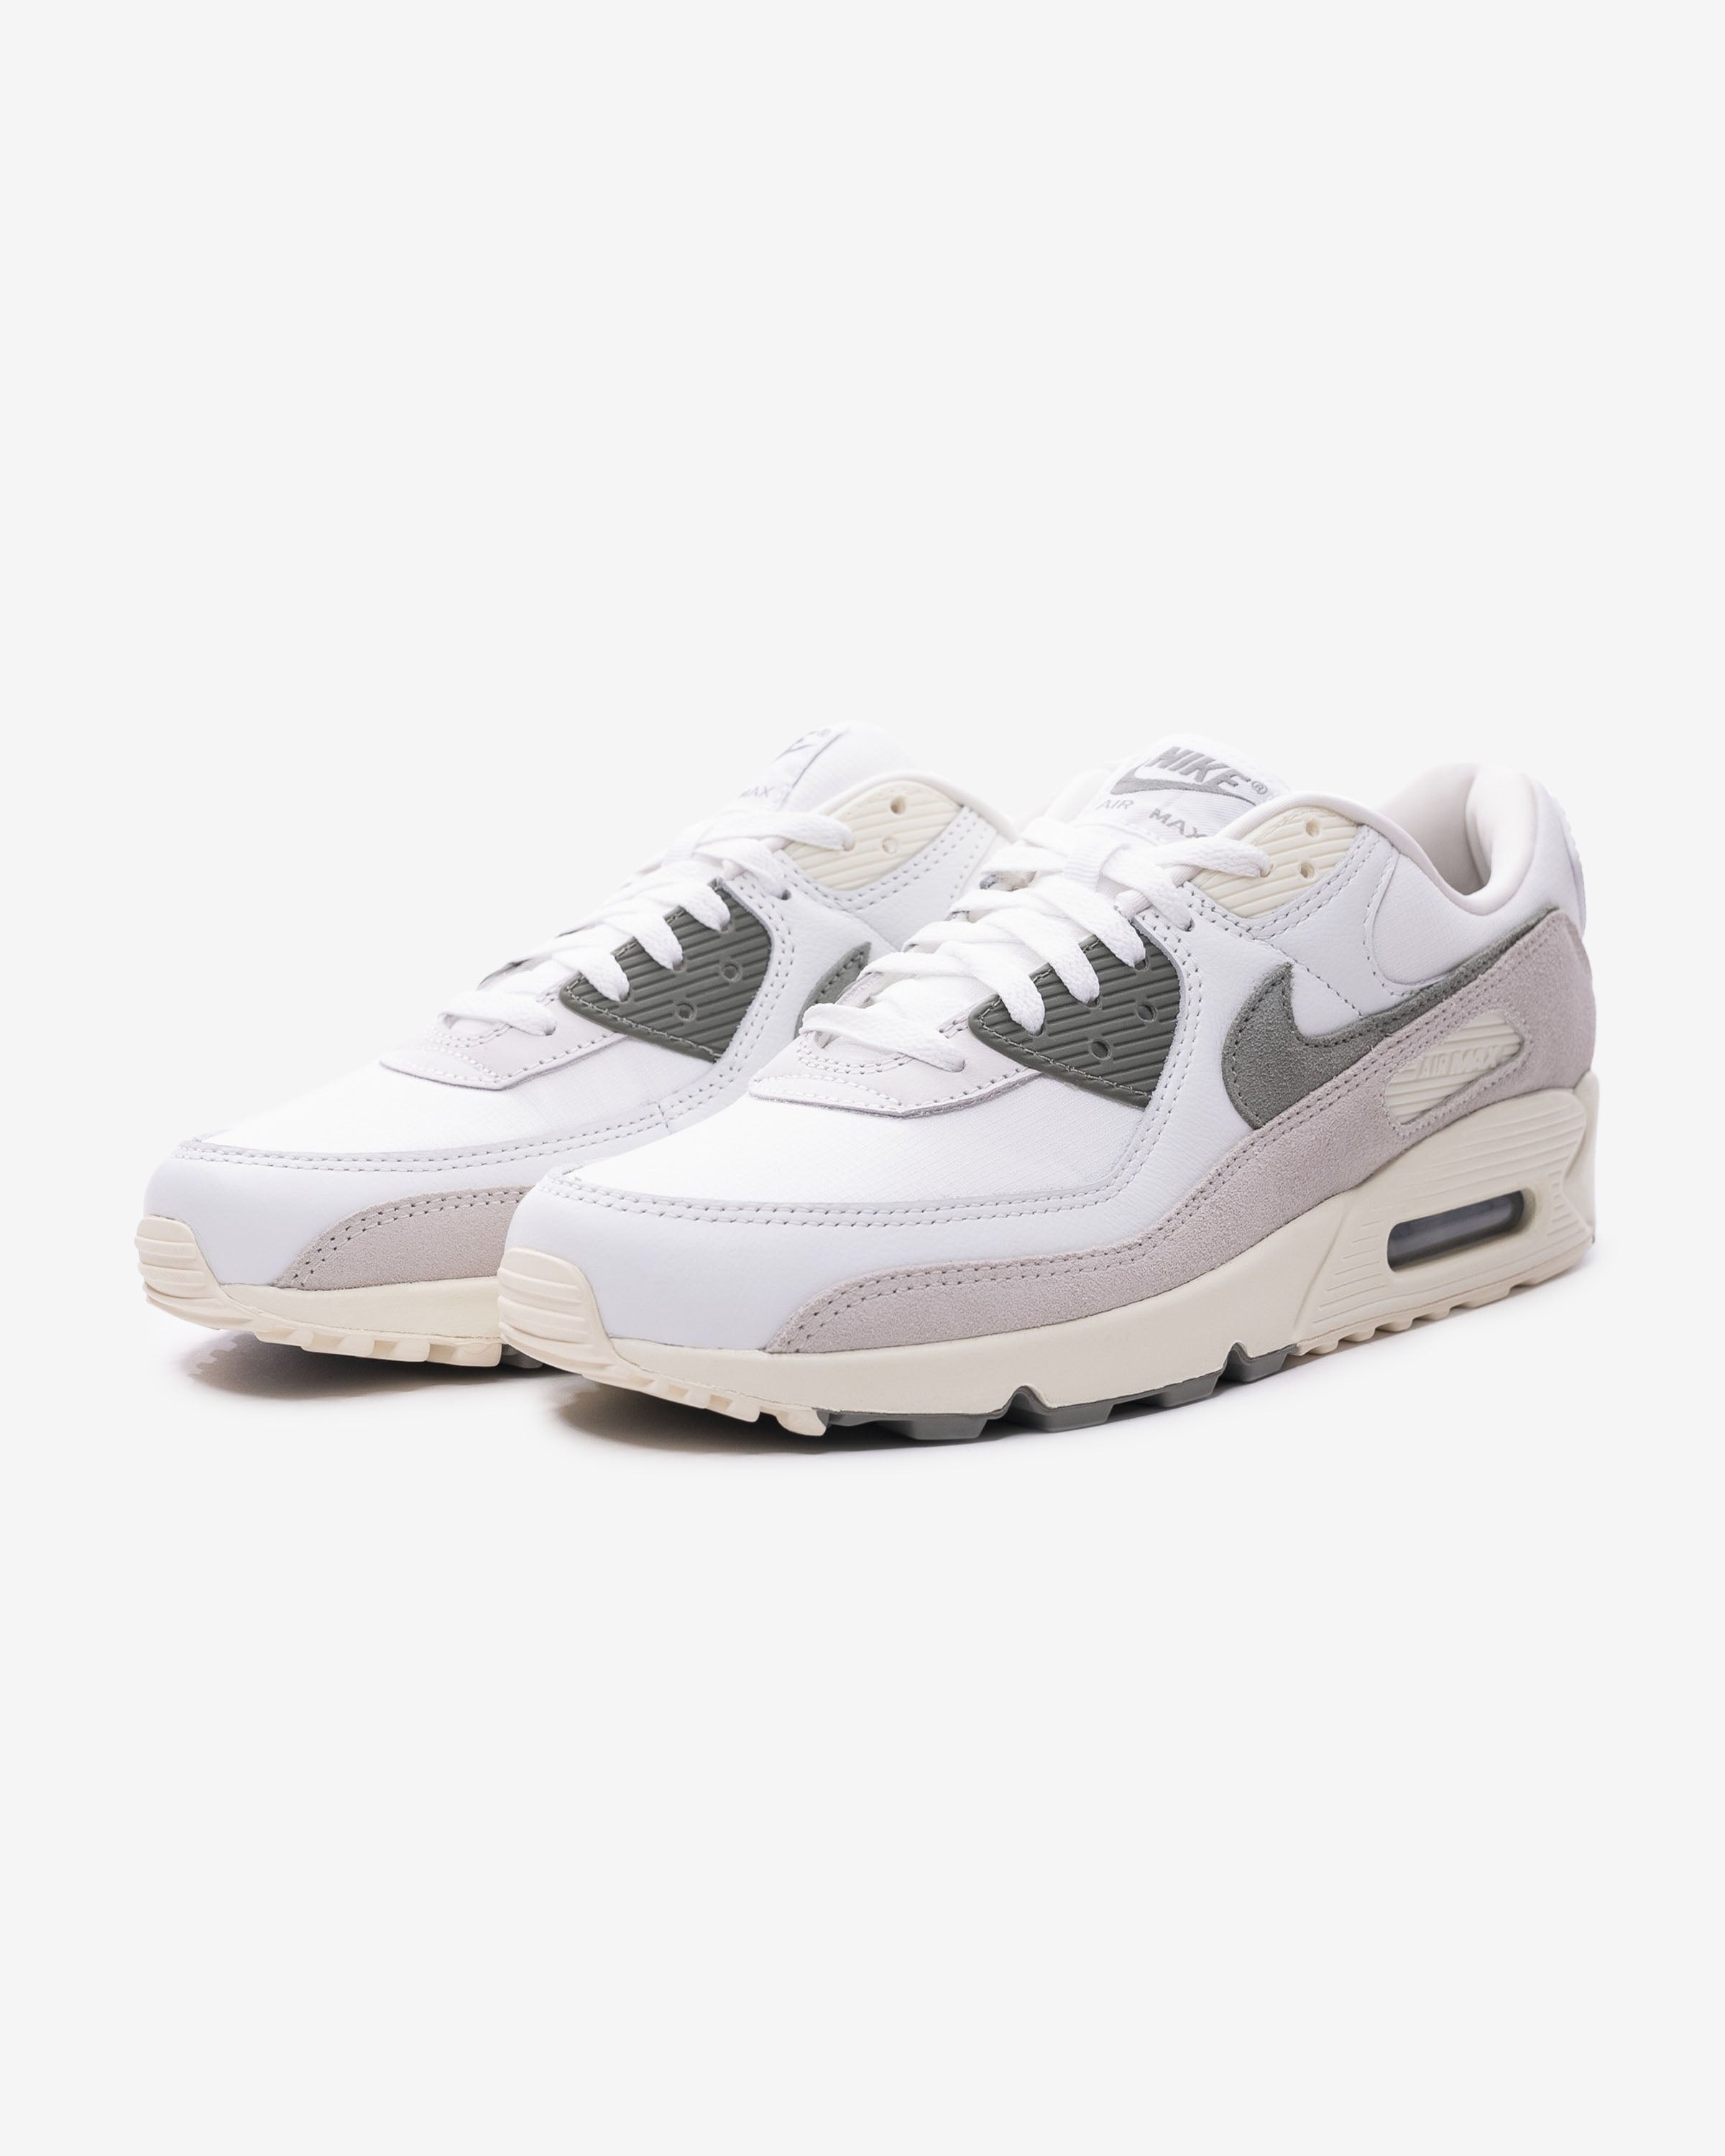 NIKE AIR MAX 90 SE – UNDEFEATED JAPAN